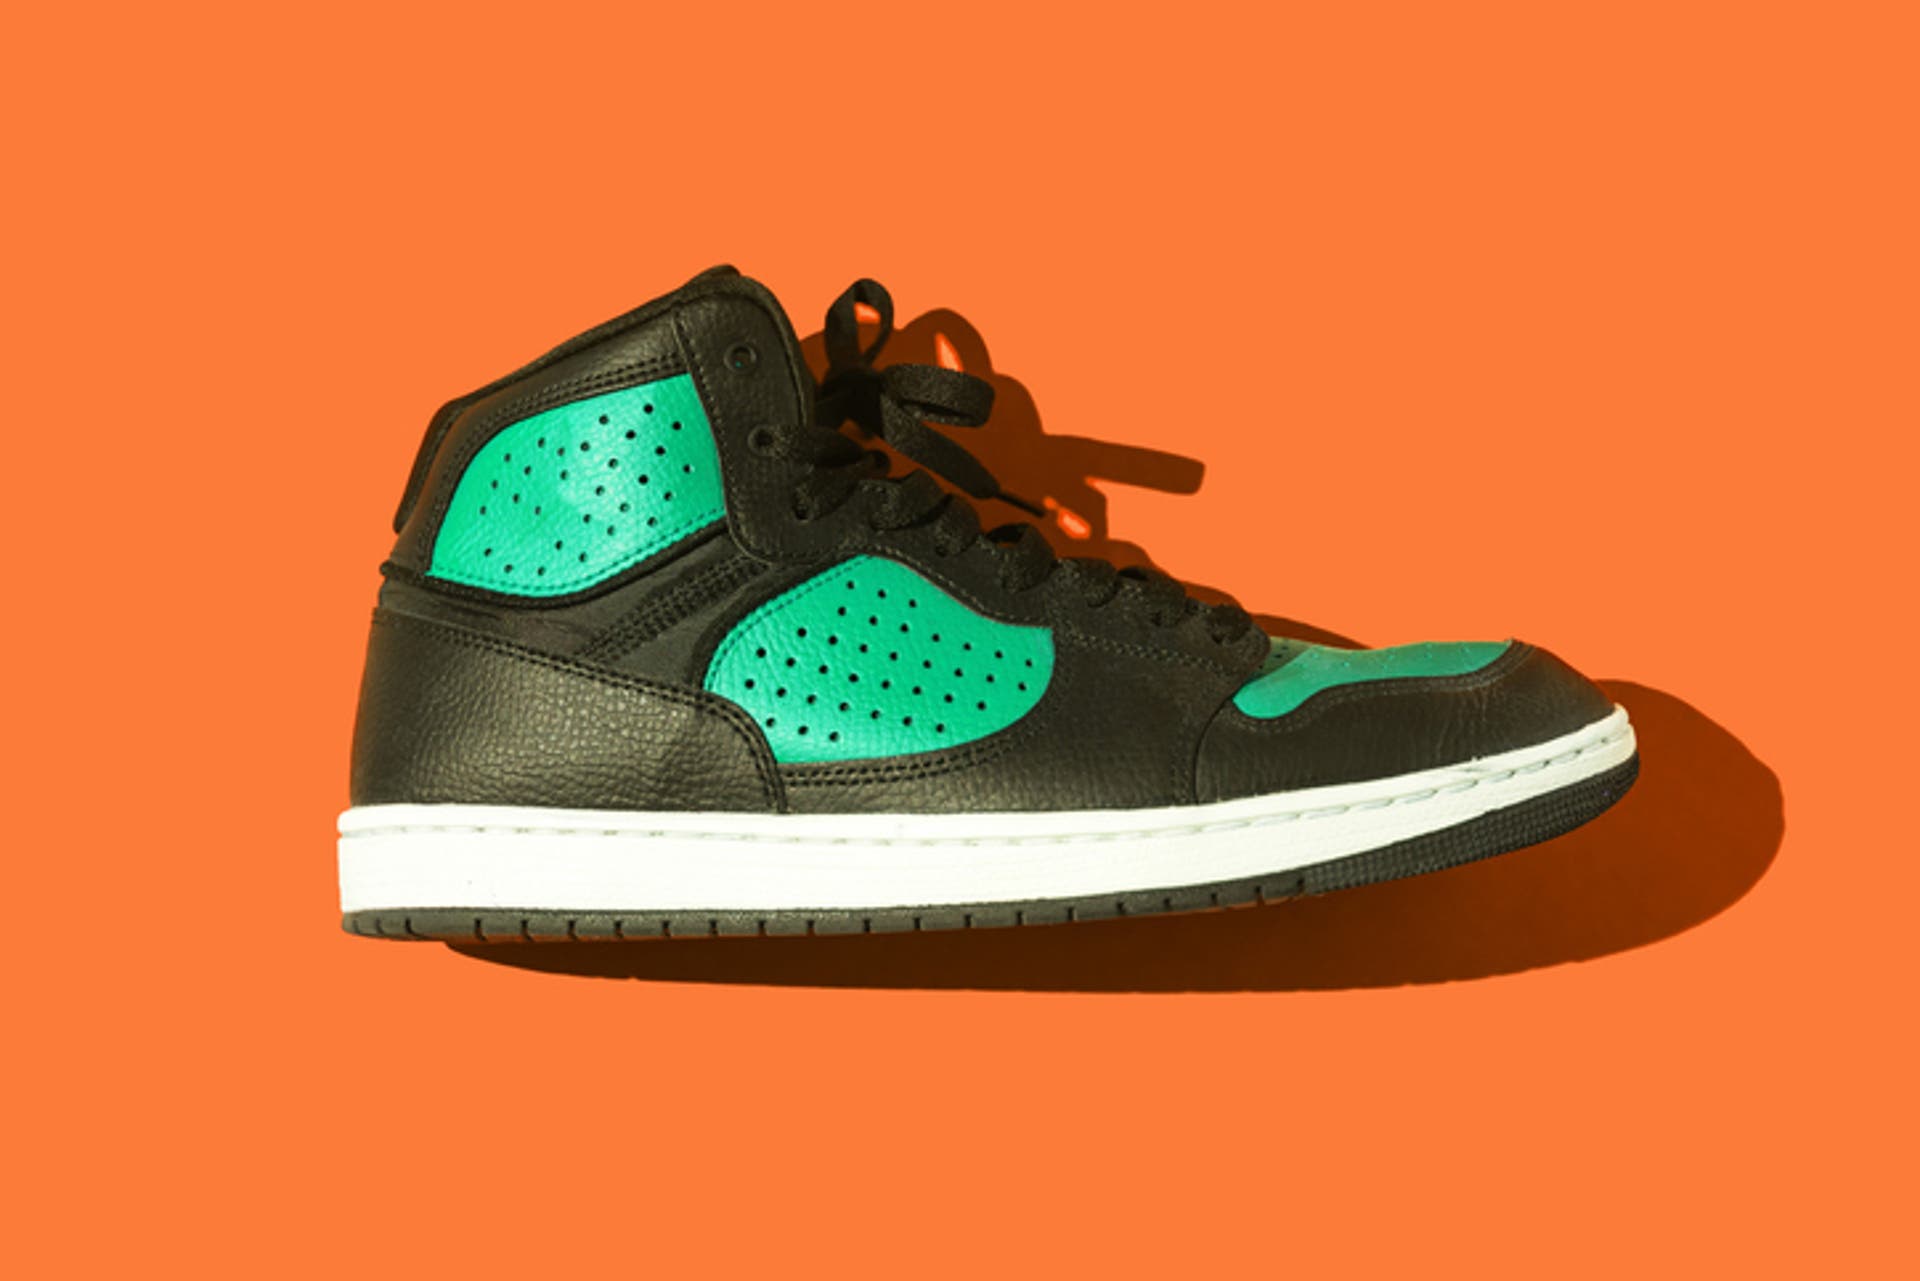  Black and green basketball sneakers, on a orange background 